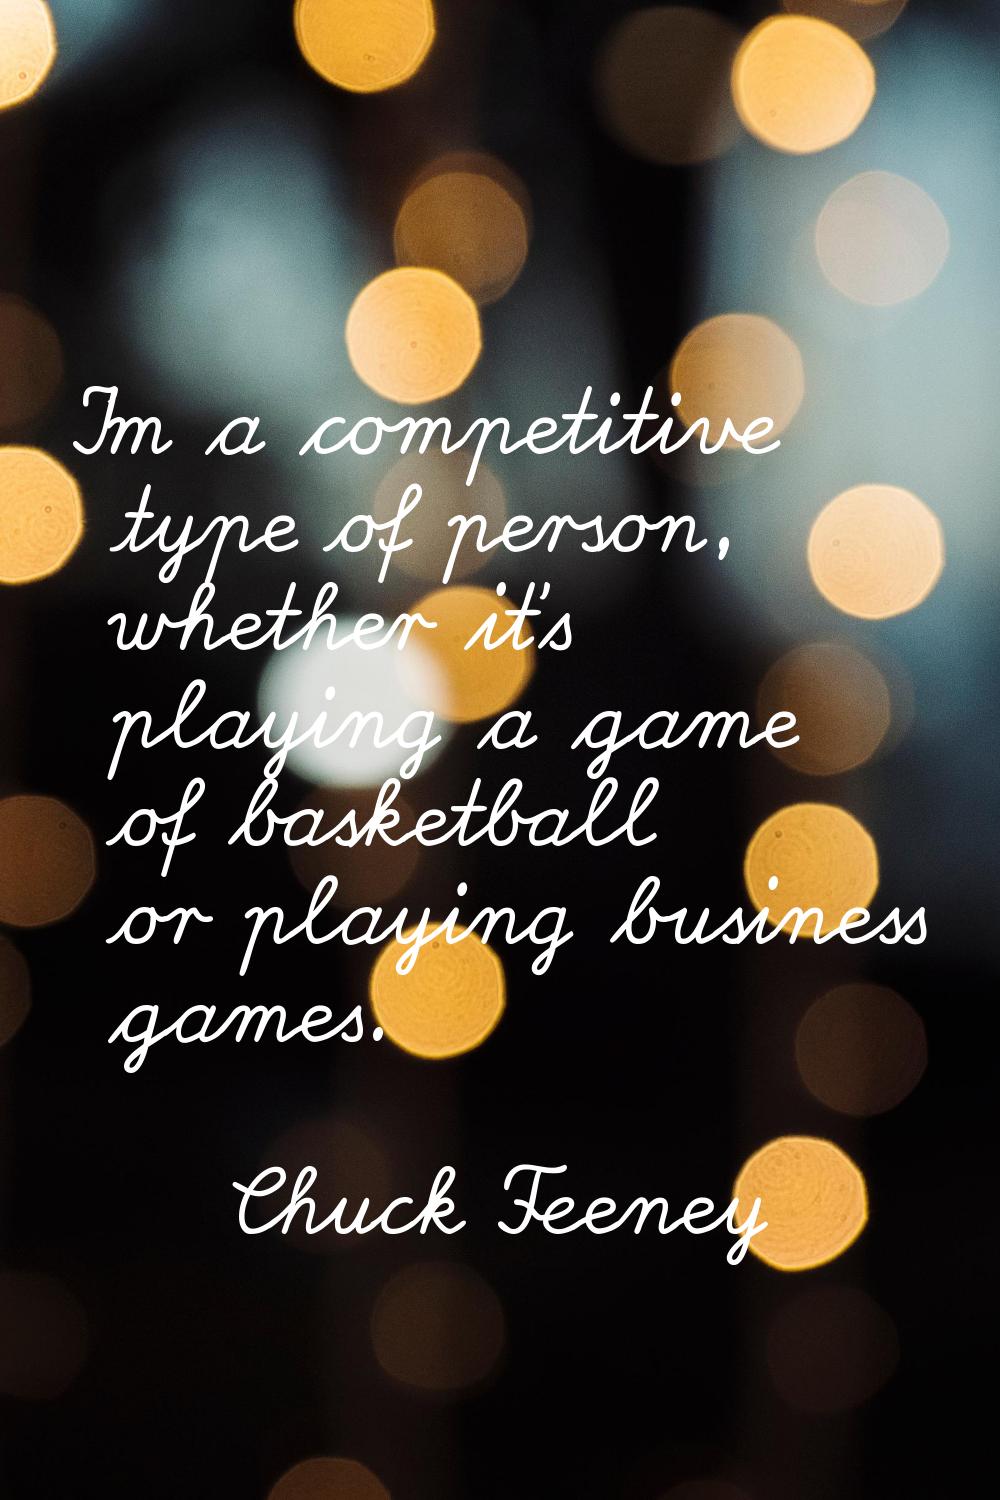 I'm a competitive type of person, whether it's playing a game of basketball or playing business gam